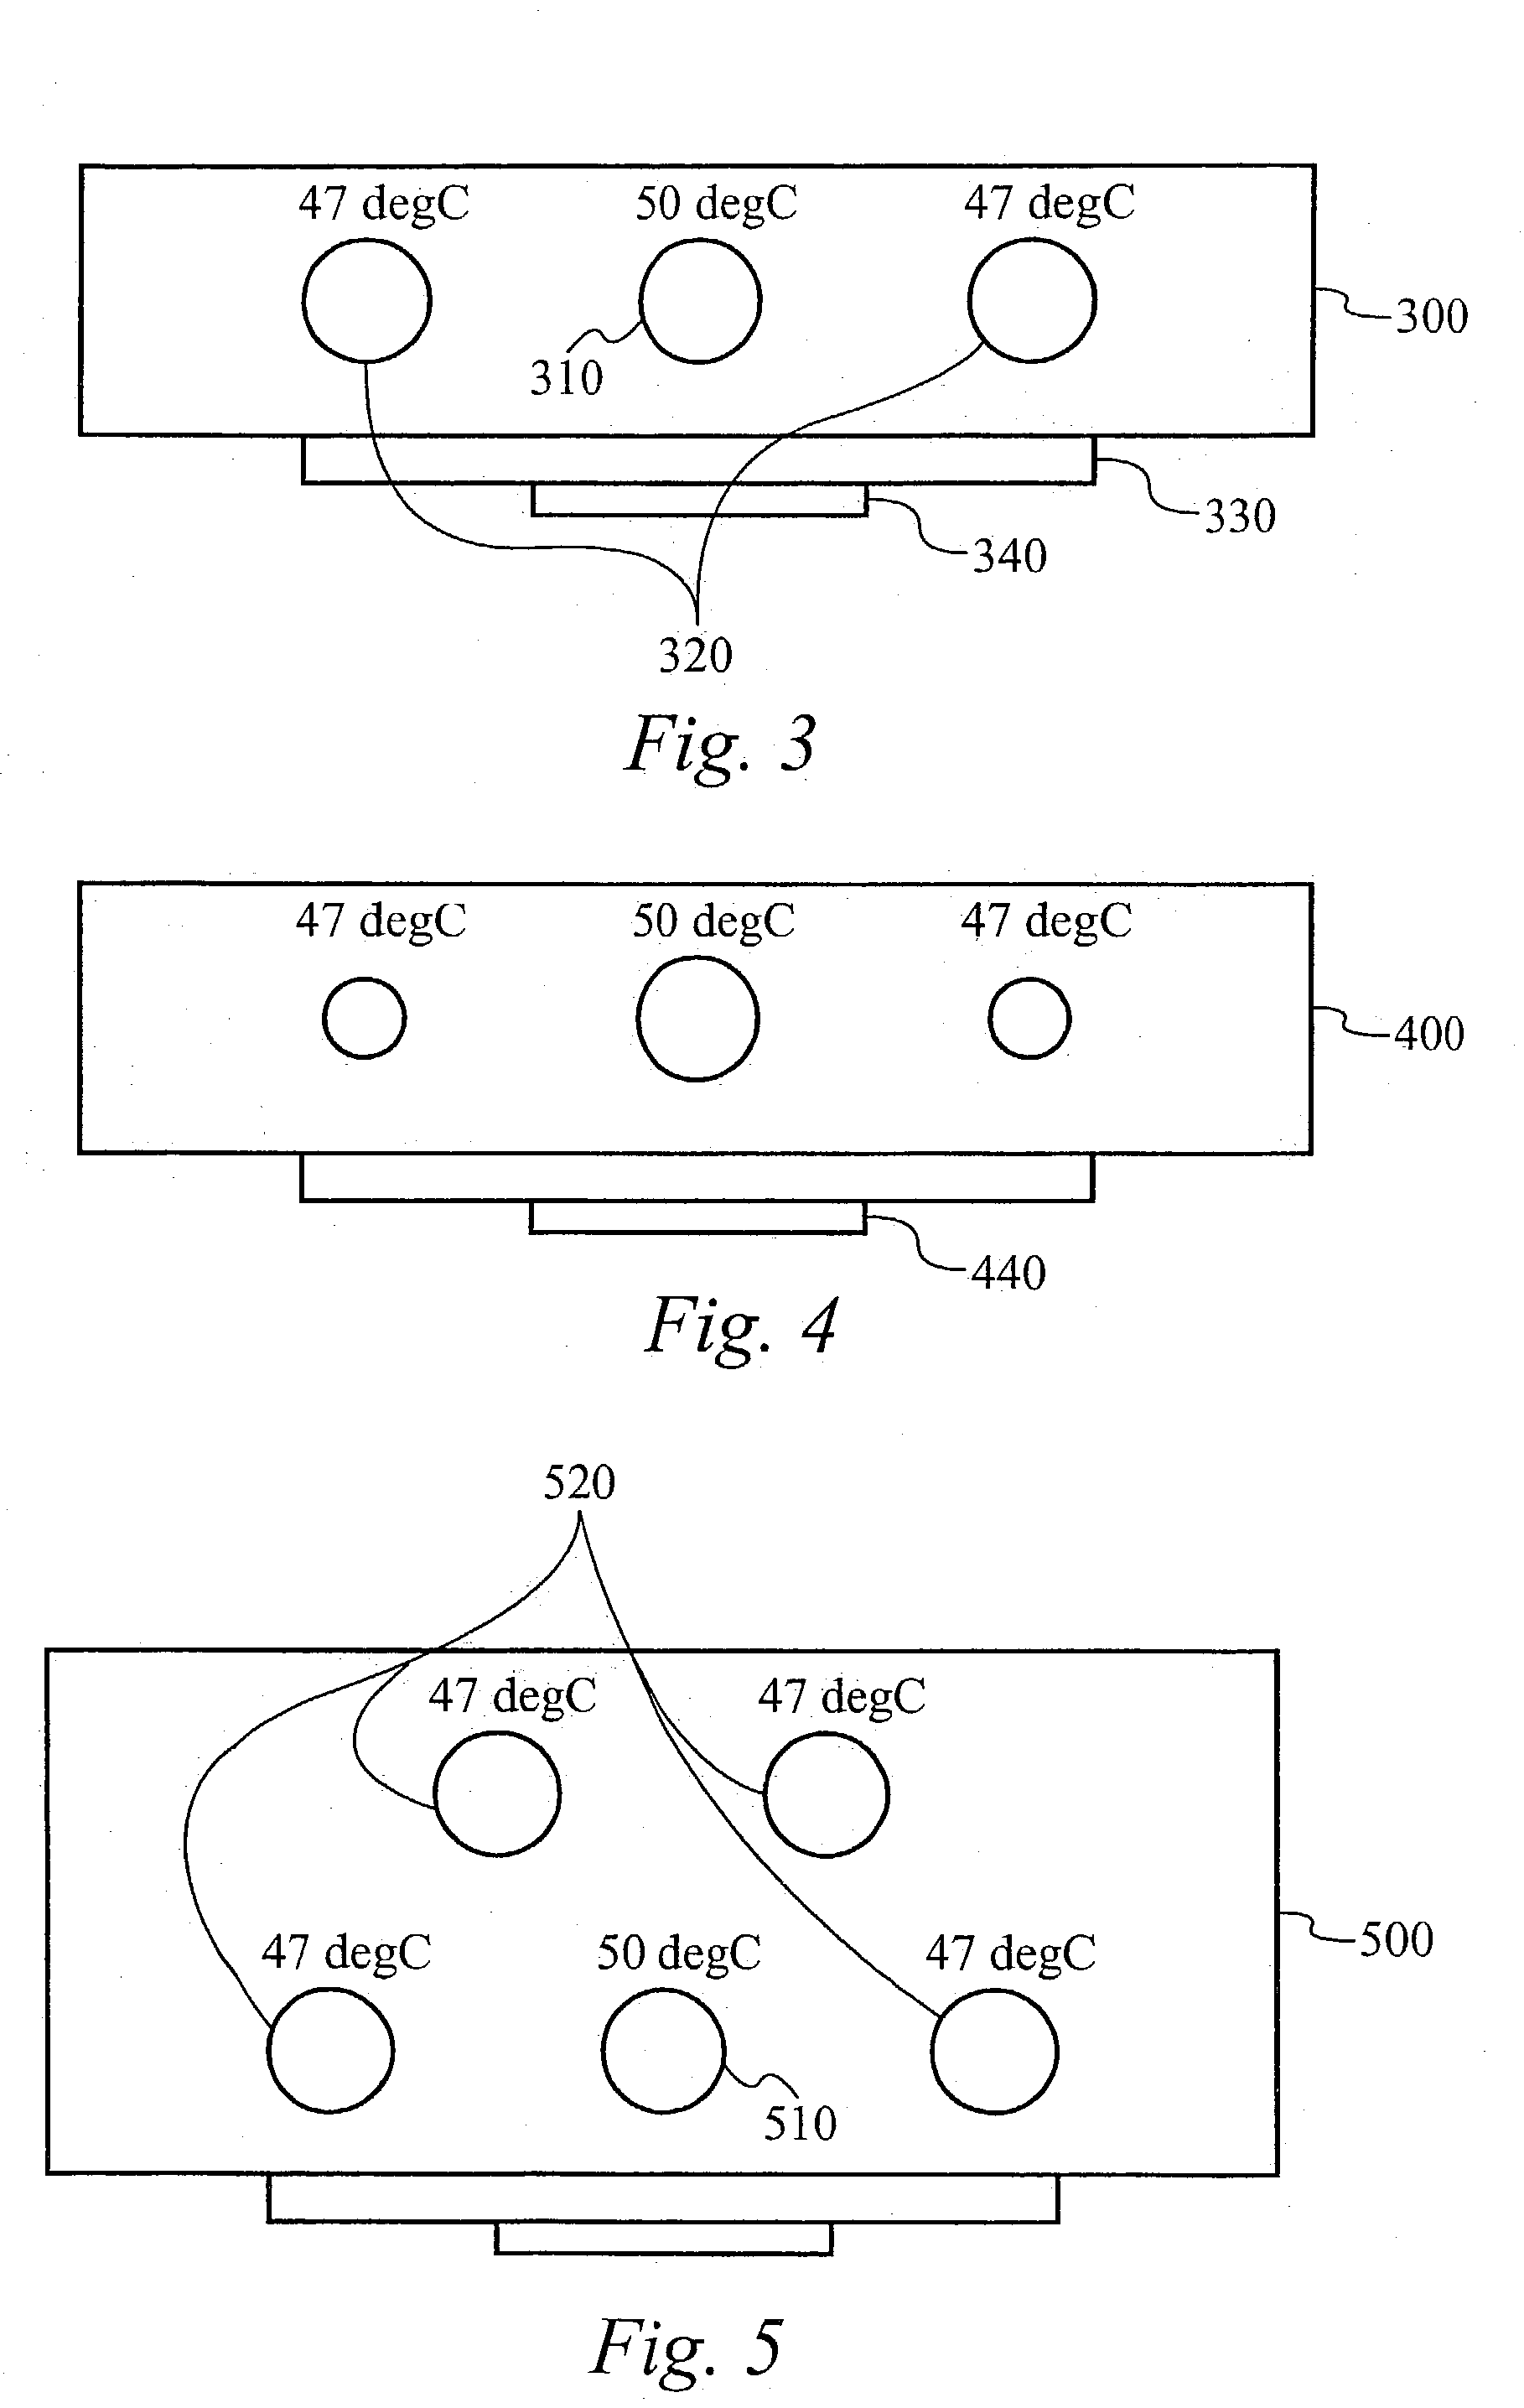 Optimized multiple heat pipe blocks for electronics cooling